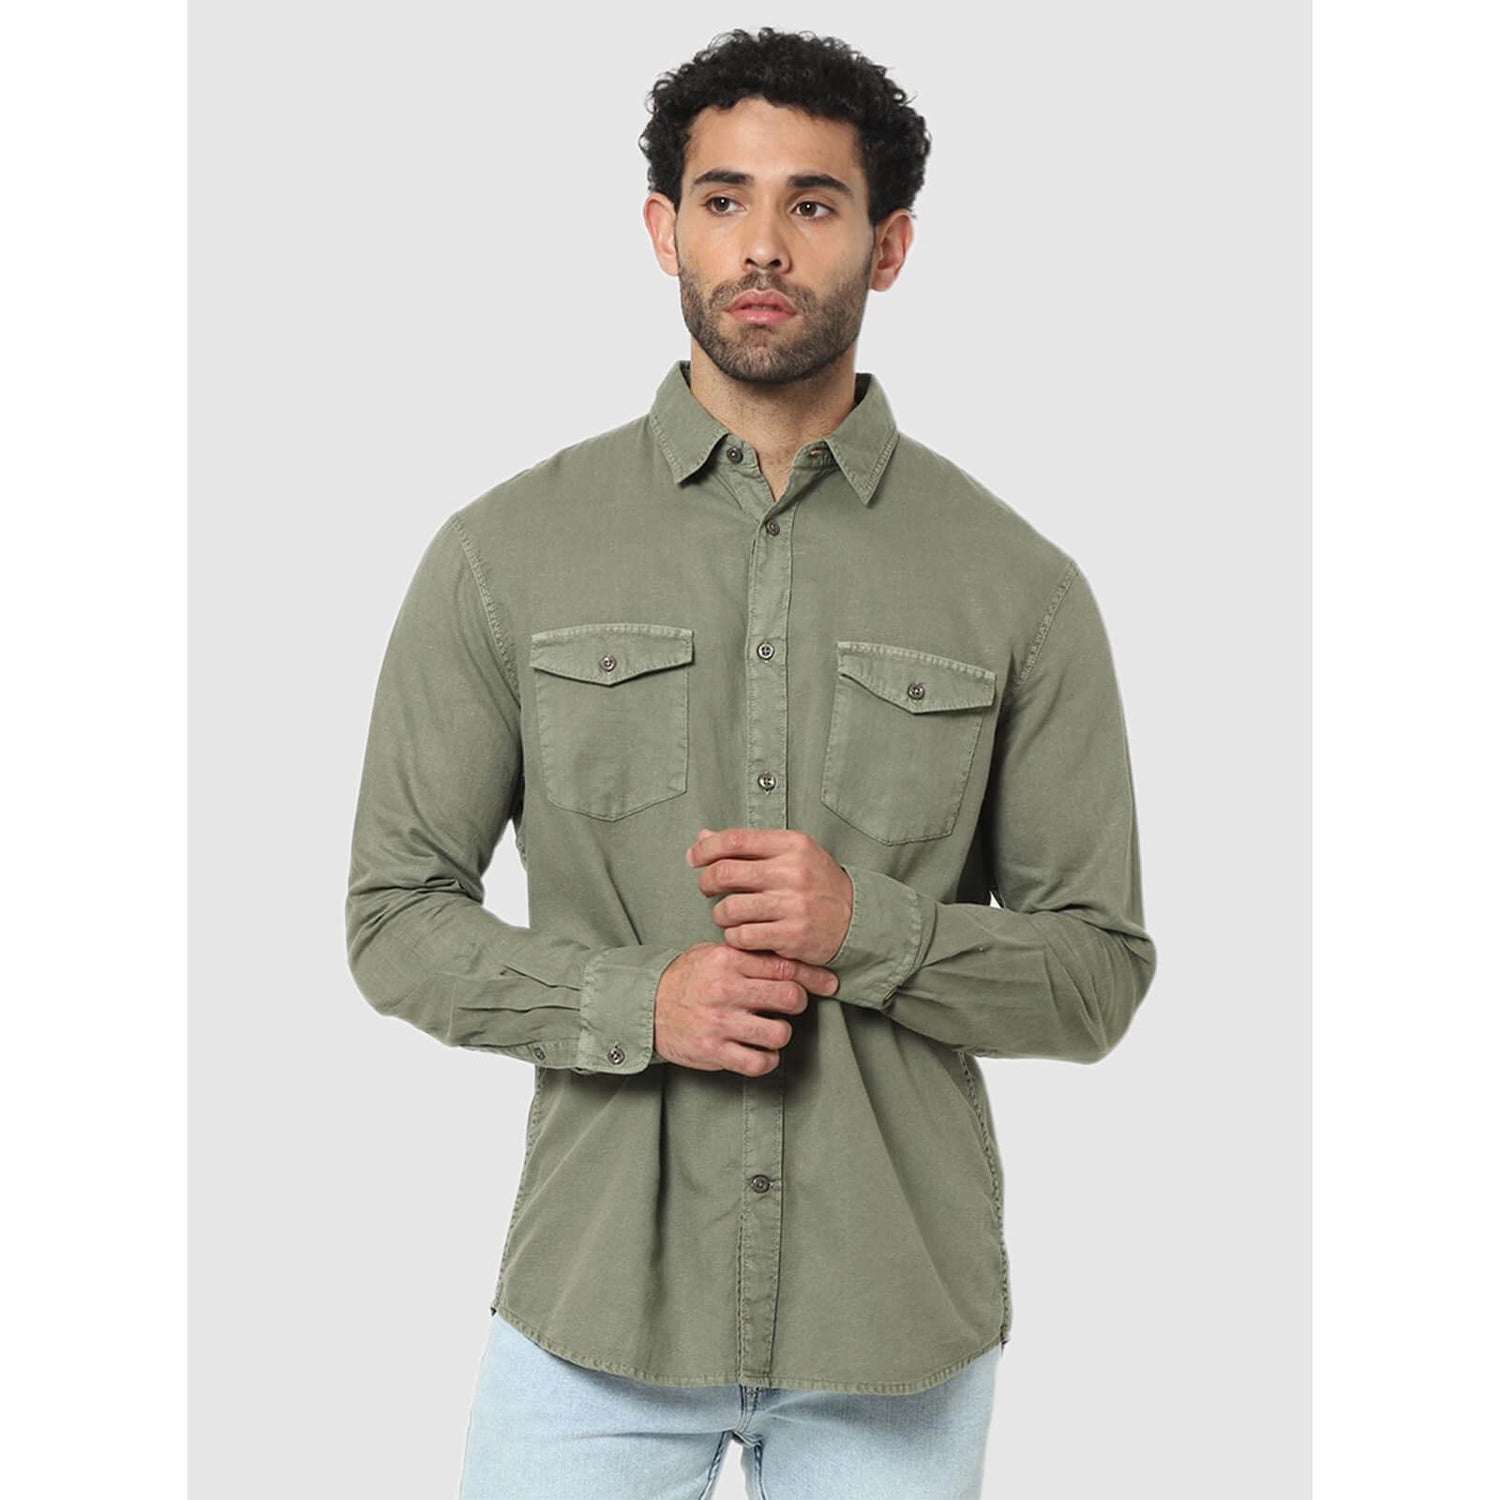 UAFASHION Women Solid Casual Green Shirt - Buy UAFASHION Women Solid Casual Green  Shirt Online at Best Prices in India | Flipkart.com